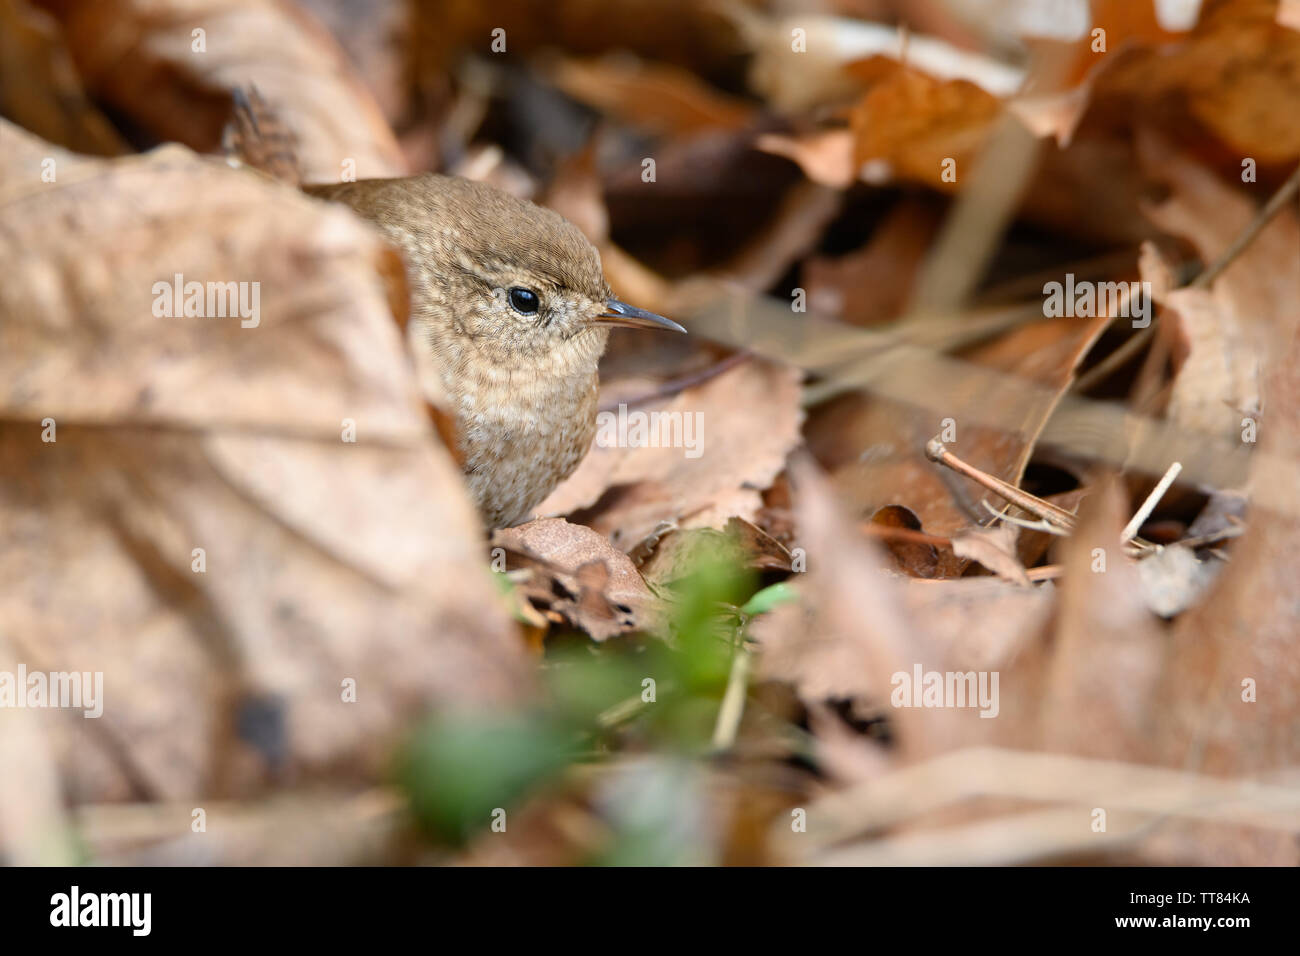 A Winter Wren hides among the fallen leaves at Colonel Samuel Smith Park in Toronto, Ontario. Stock Photo